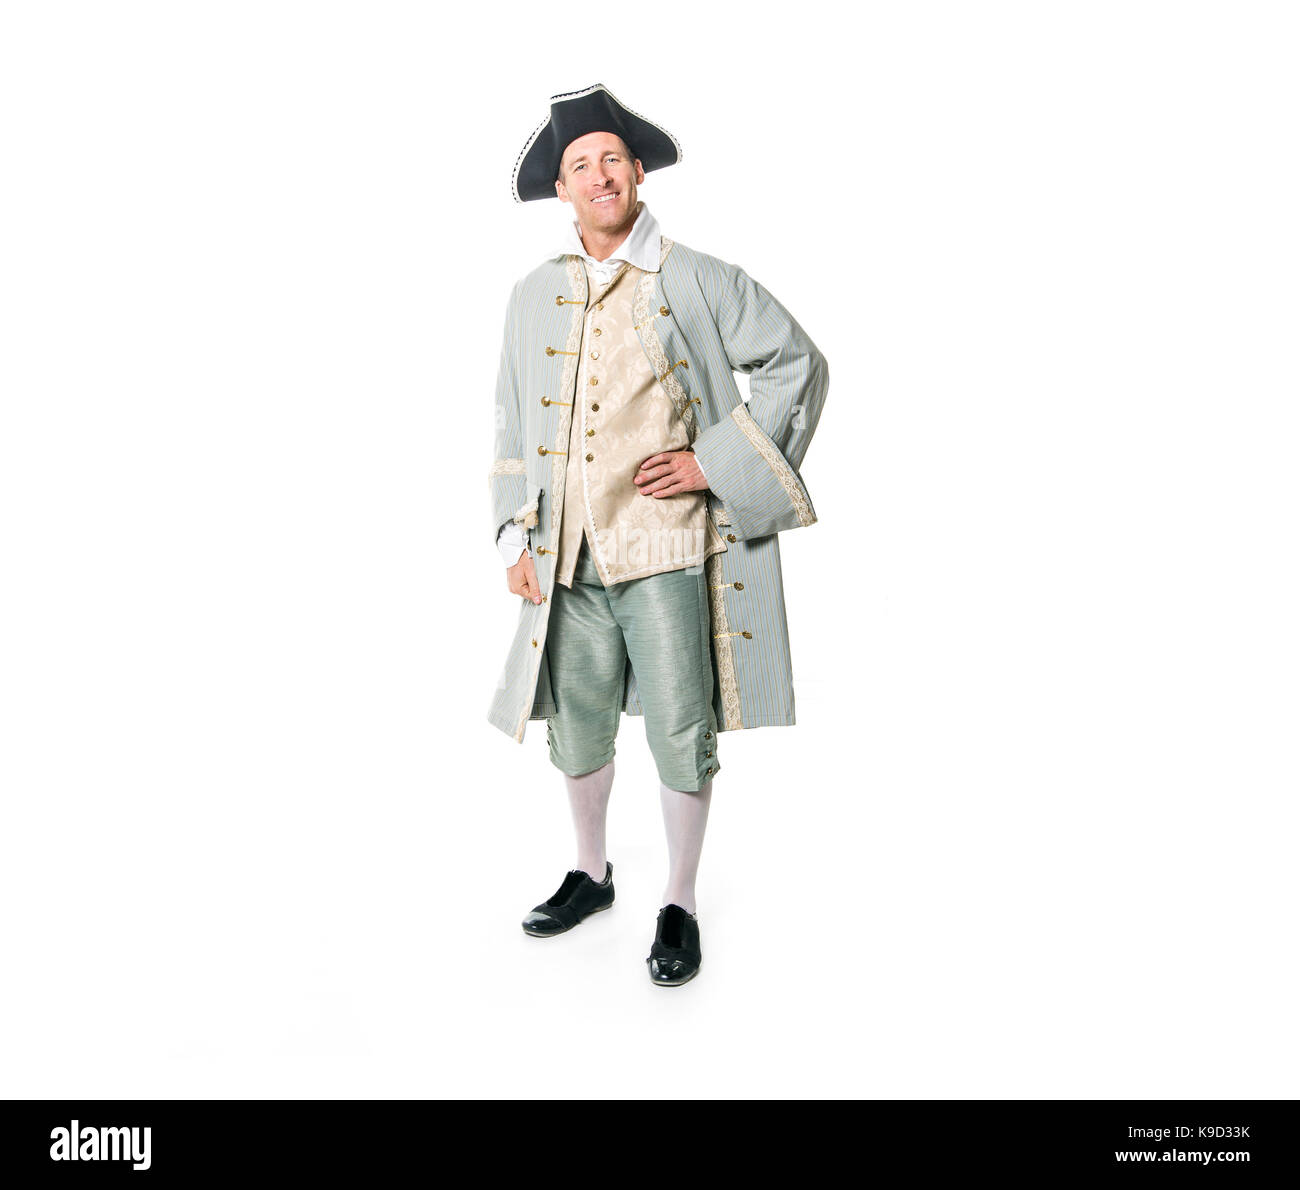 A man dressed as a courtier or prince on white background Stock Photo